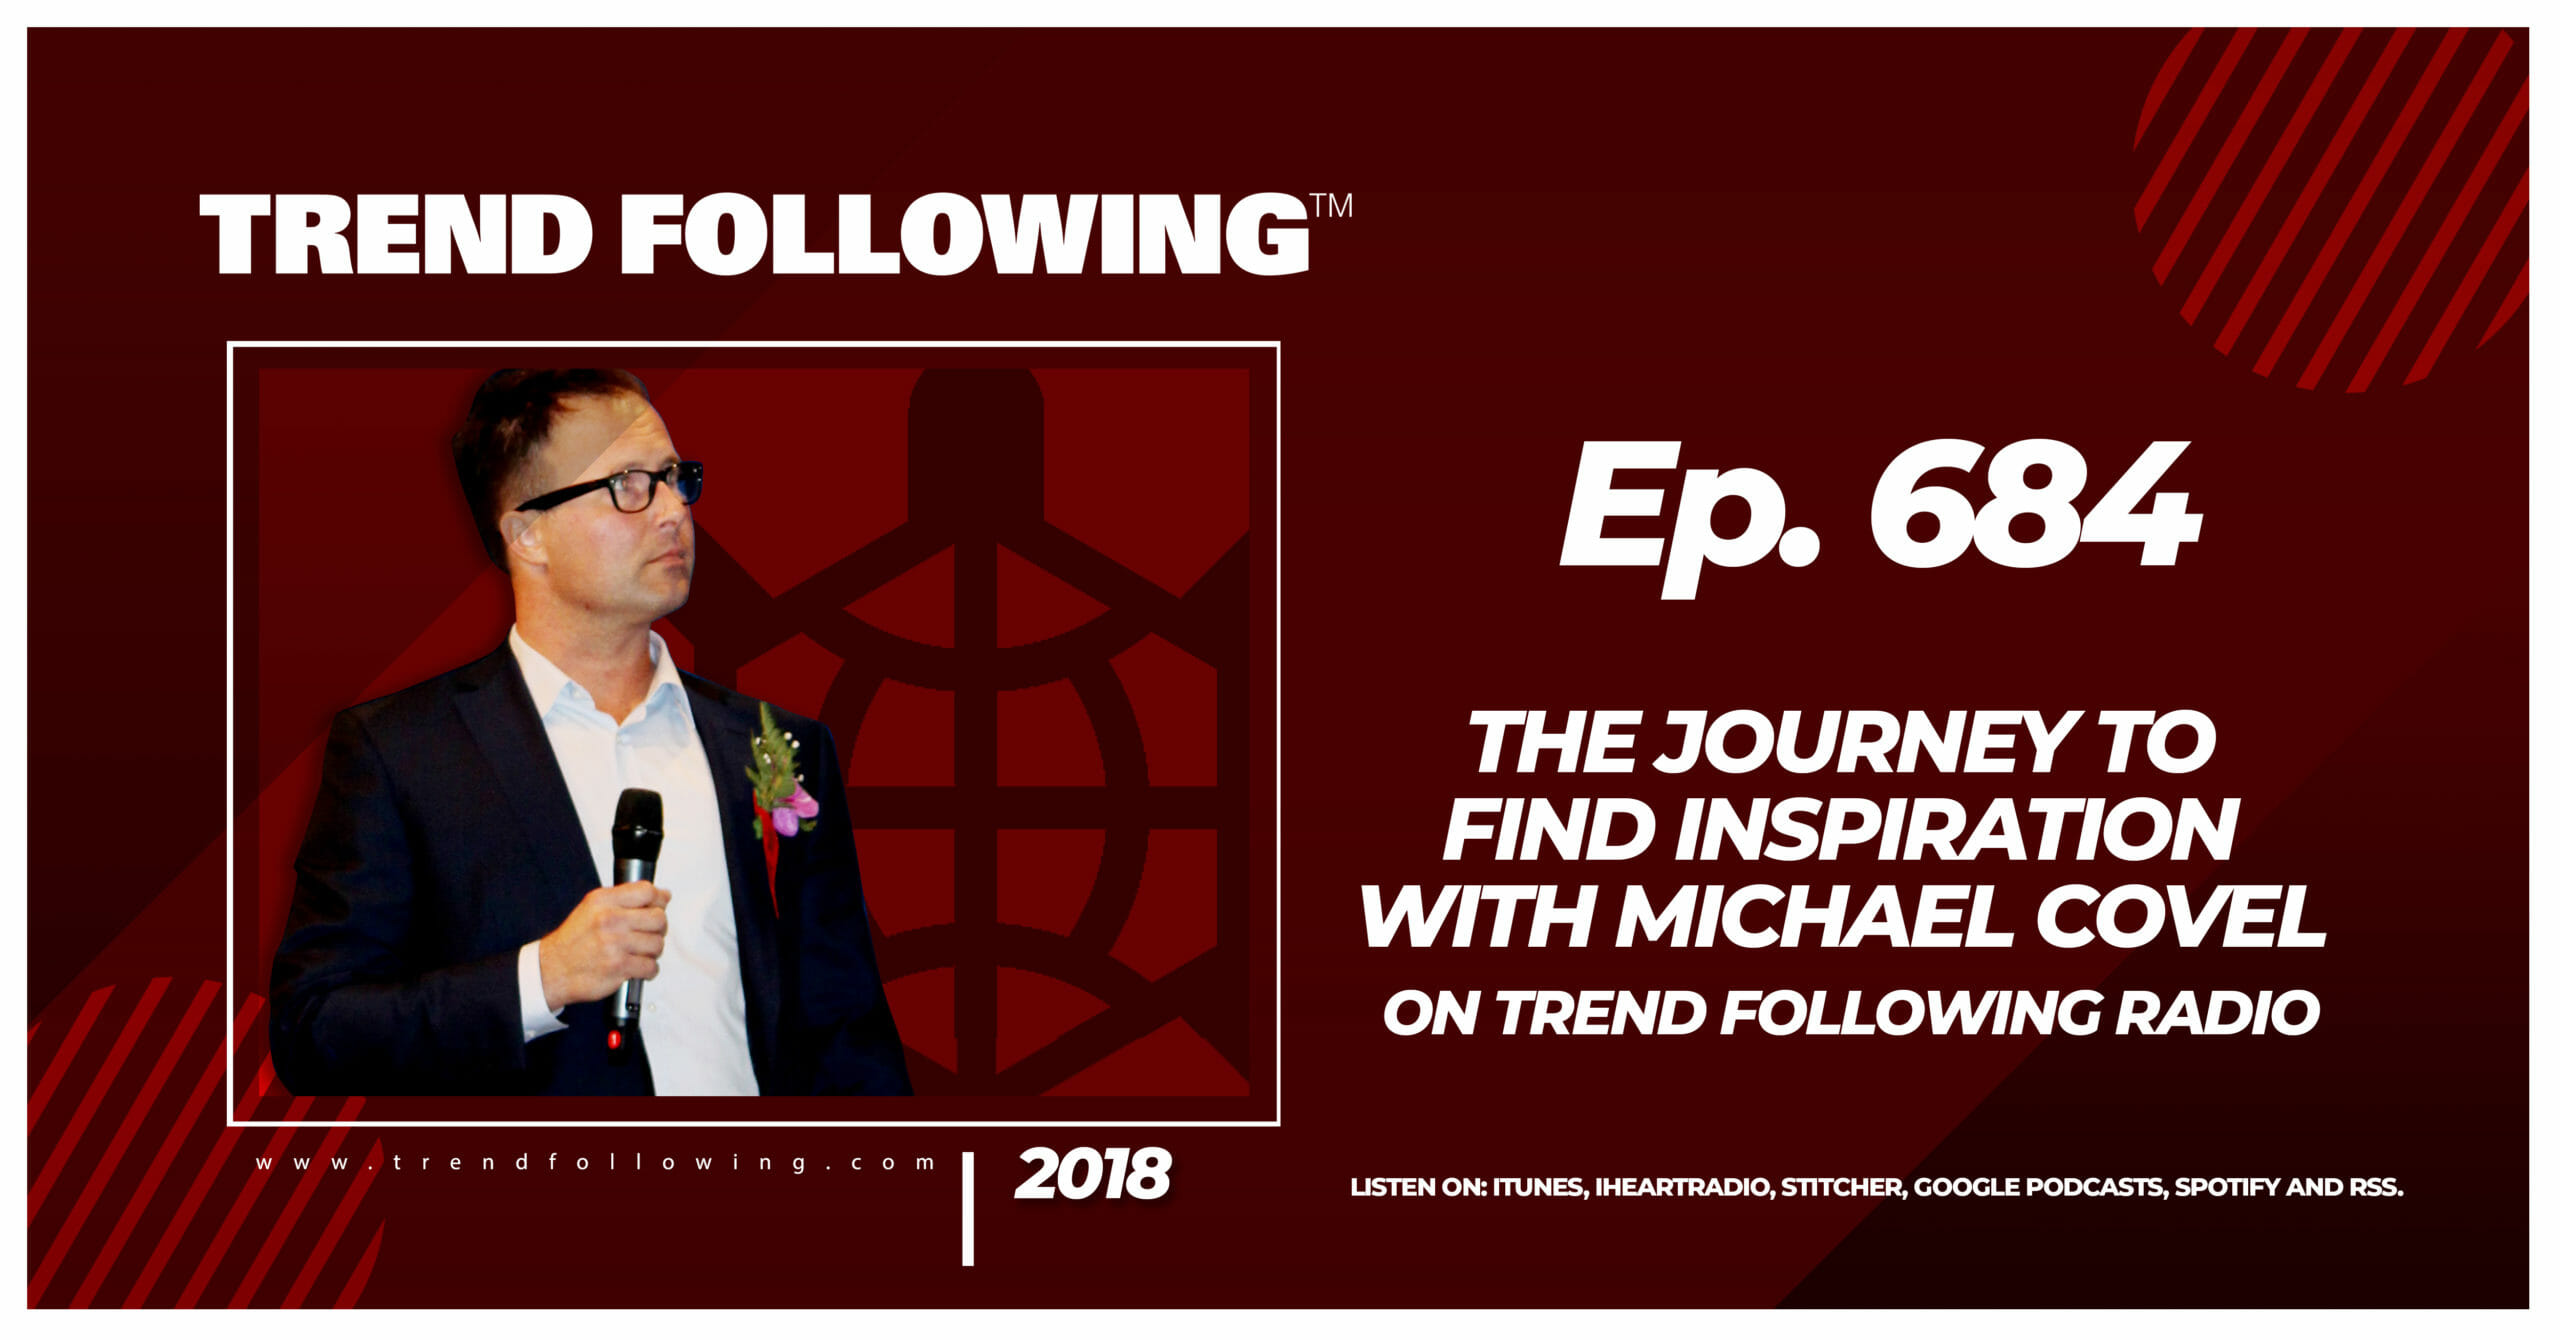 The Journey to Find Inspiration with Michael Covel